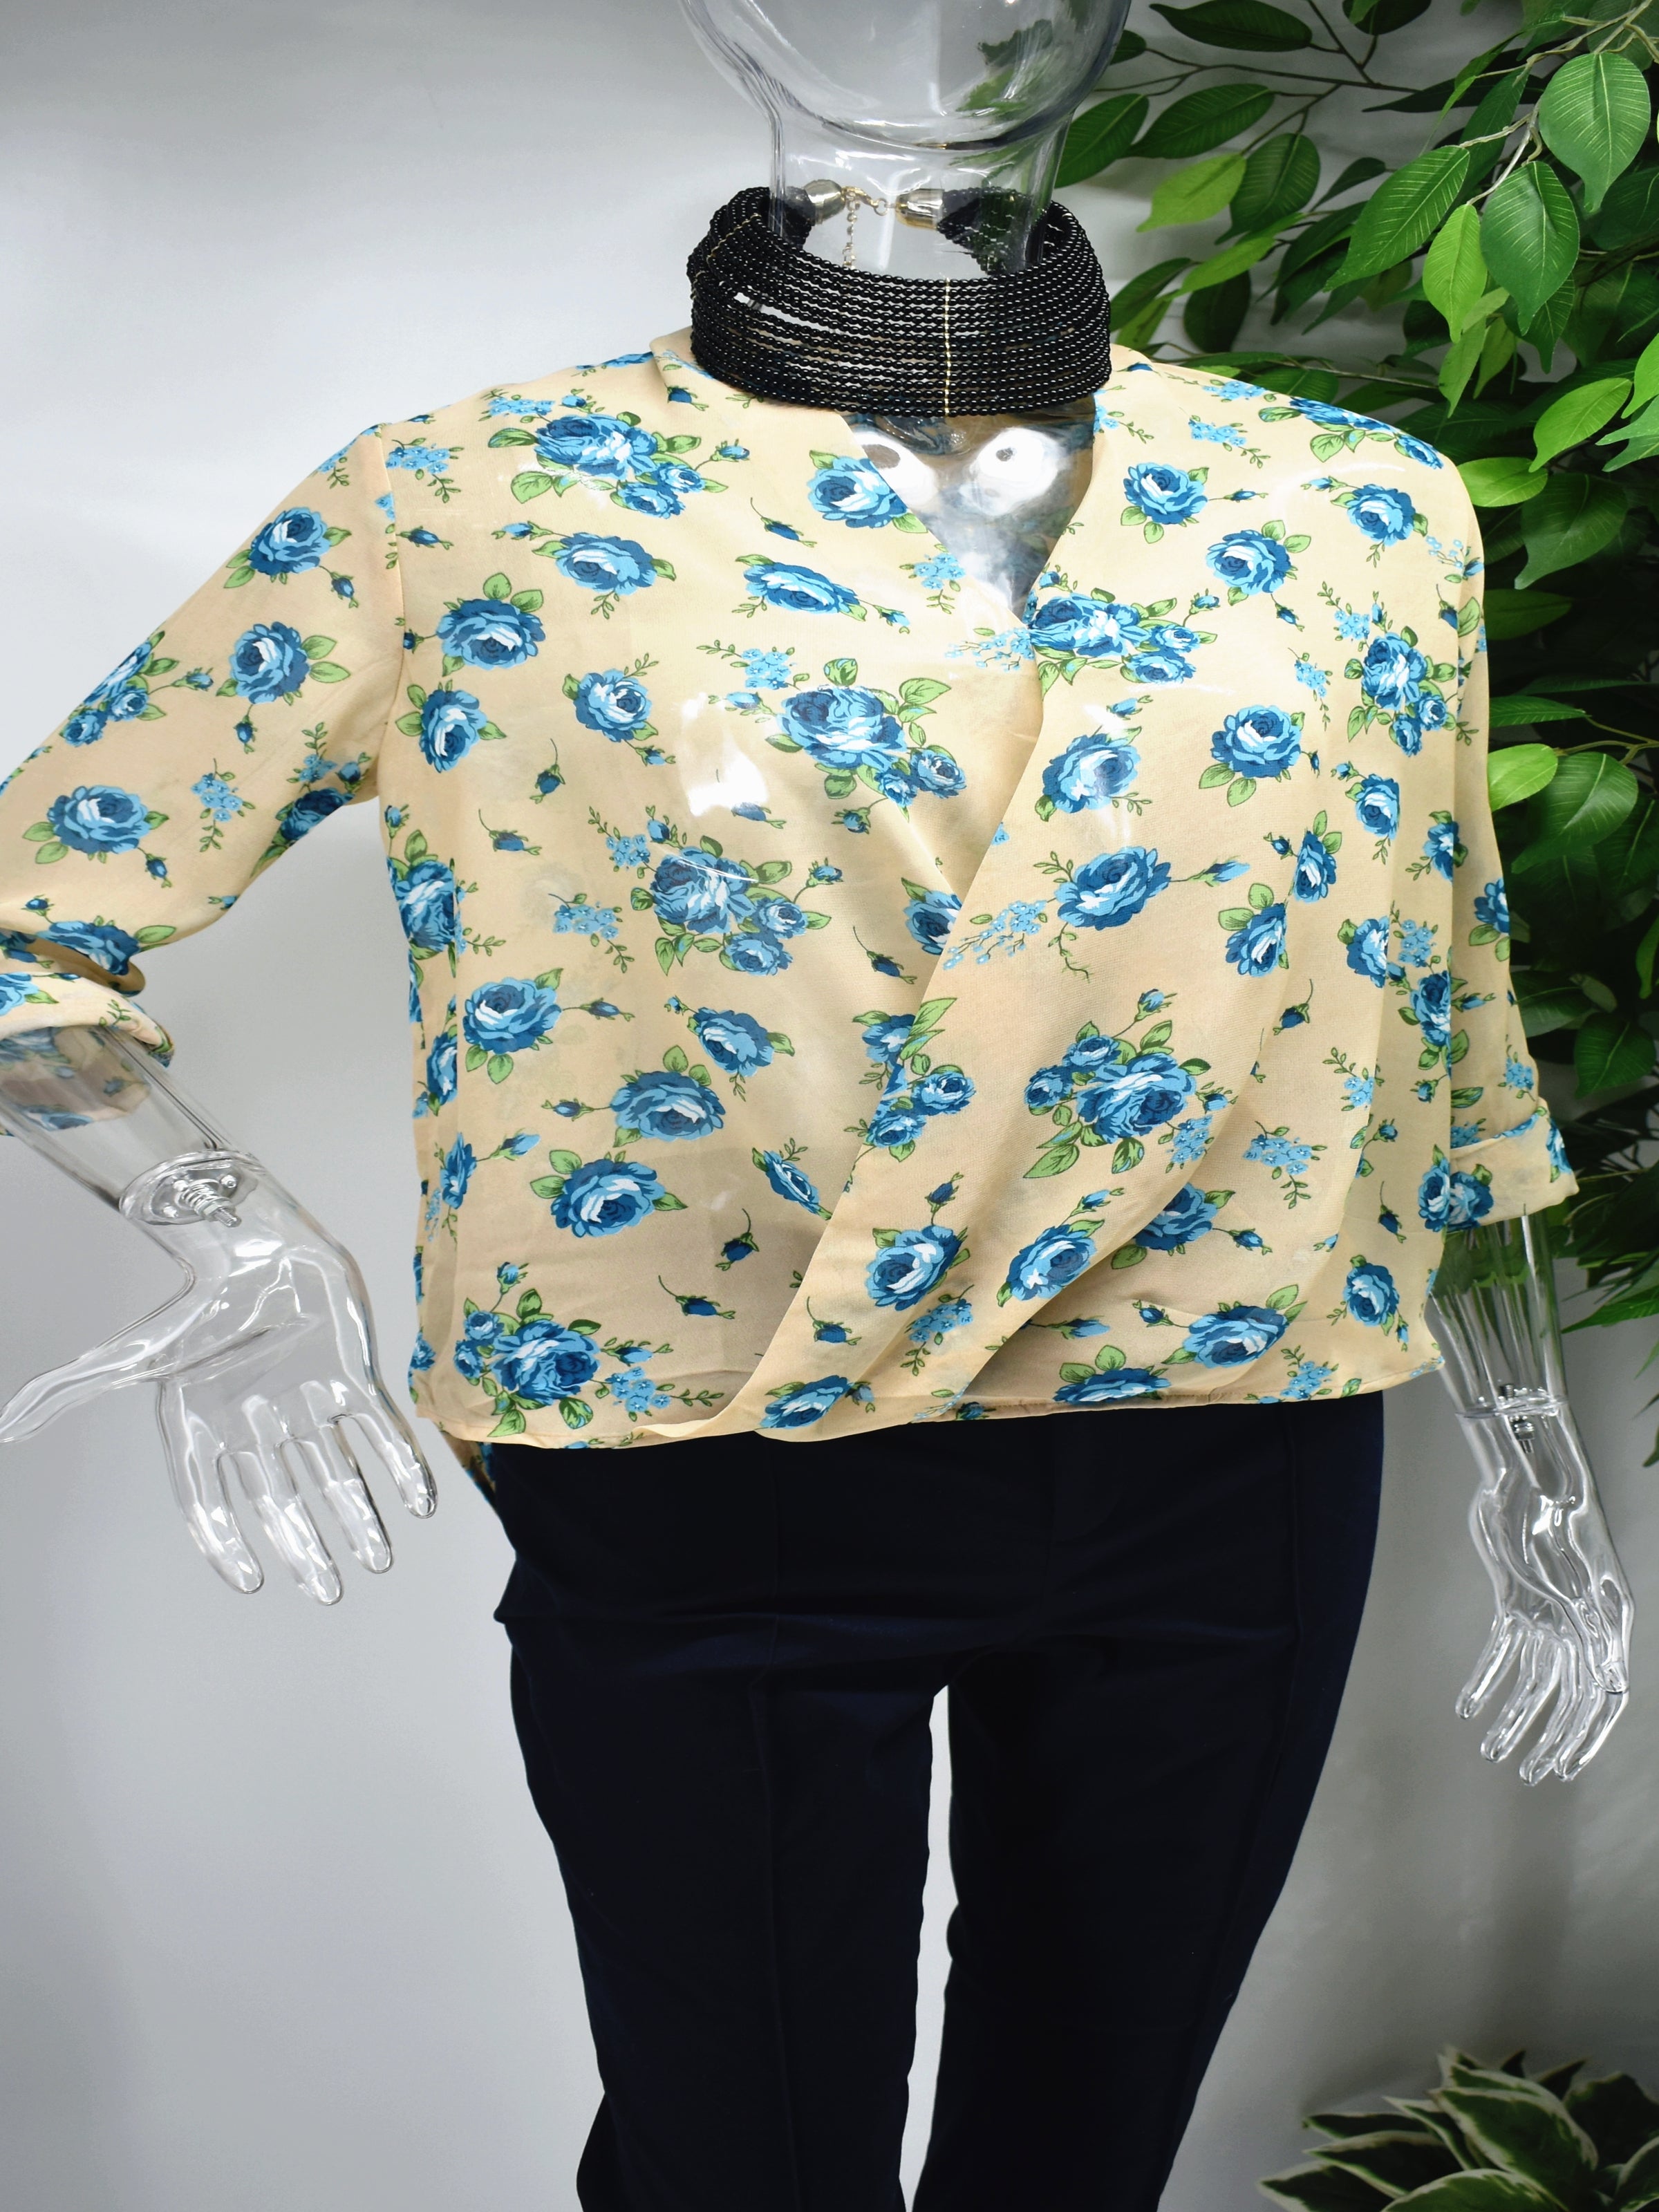 Our Baileil floral blouse will let them notice you when you walk into the room. Our Baileil blouse is a beige lap front top with blue floral prints. 